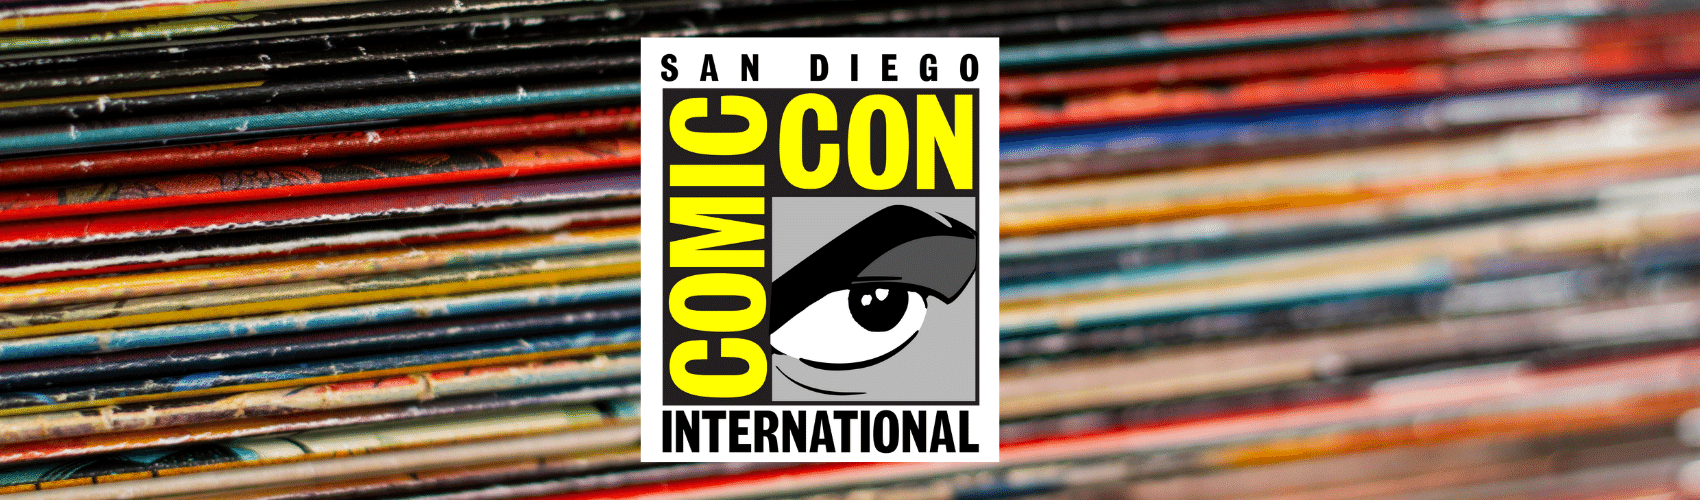 What’s at San Diego Comic-Con for Halloween and horror fans?